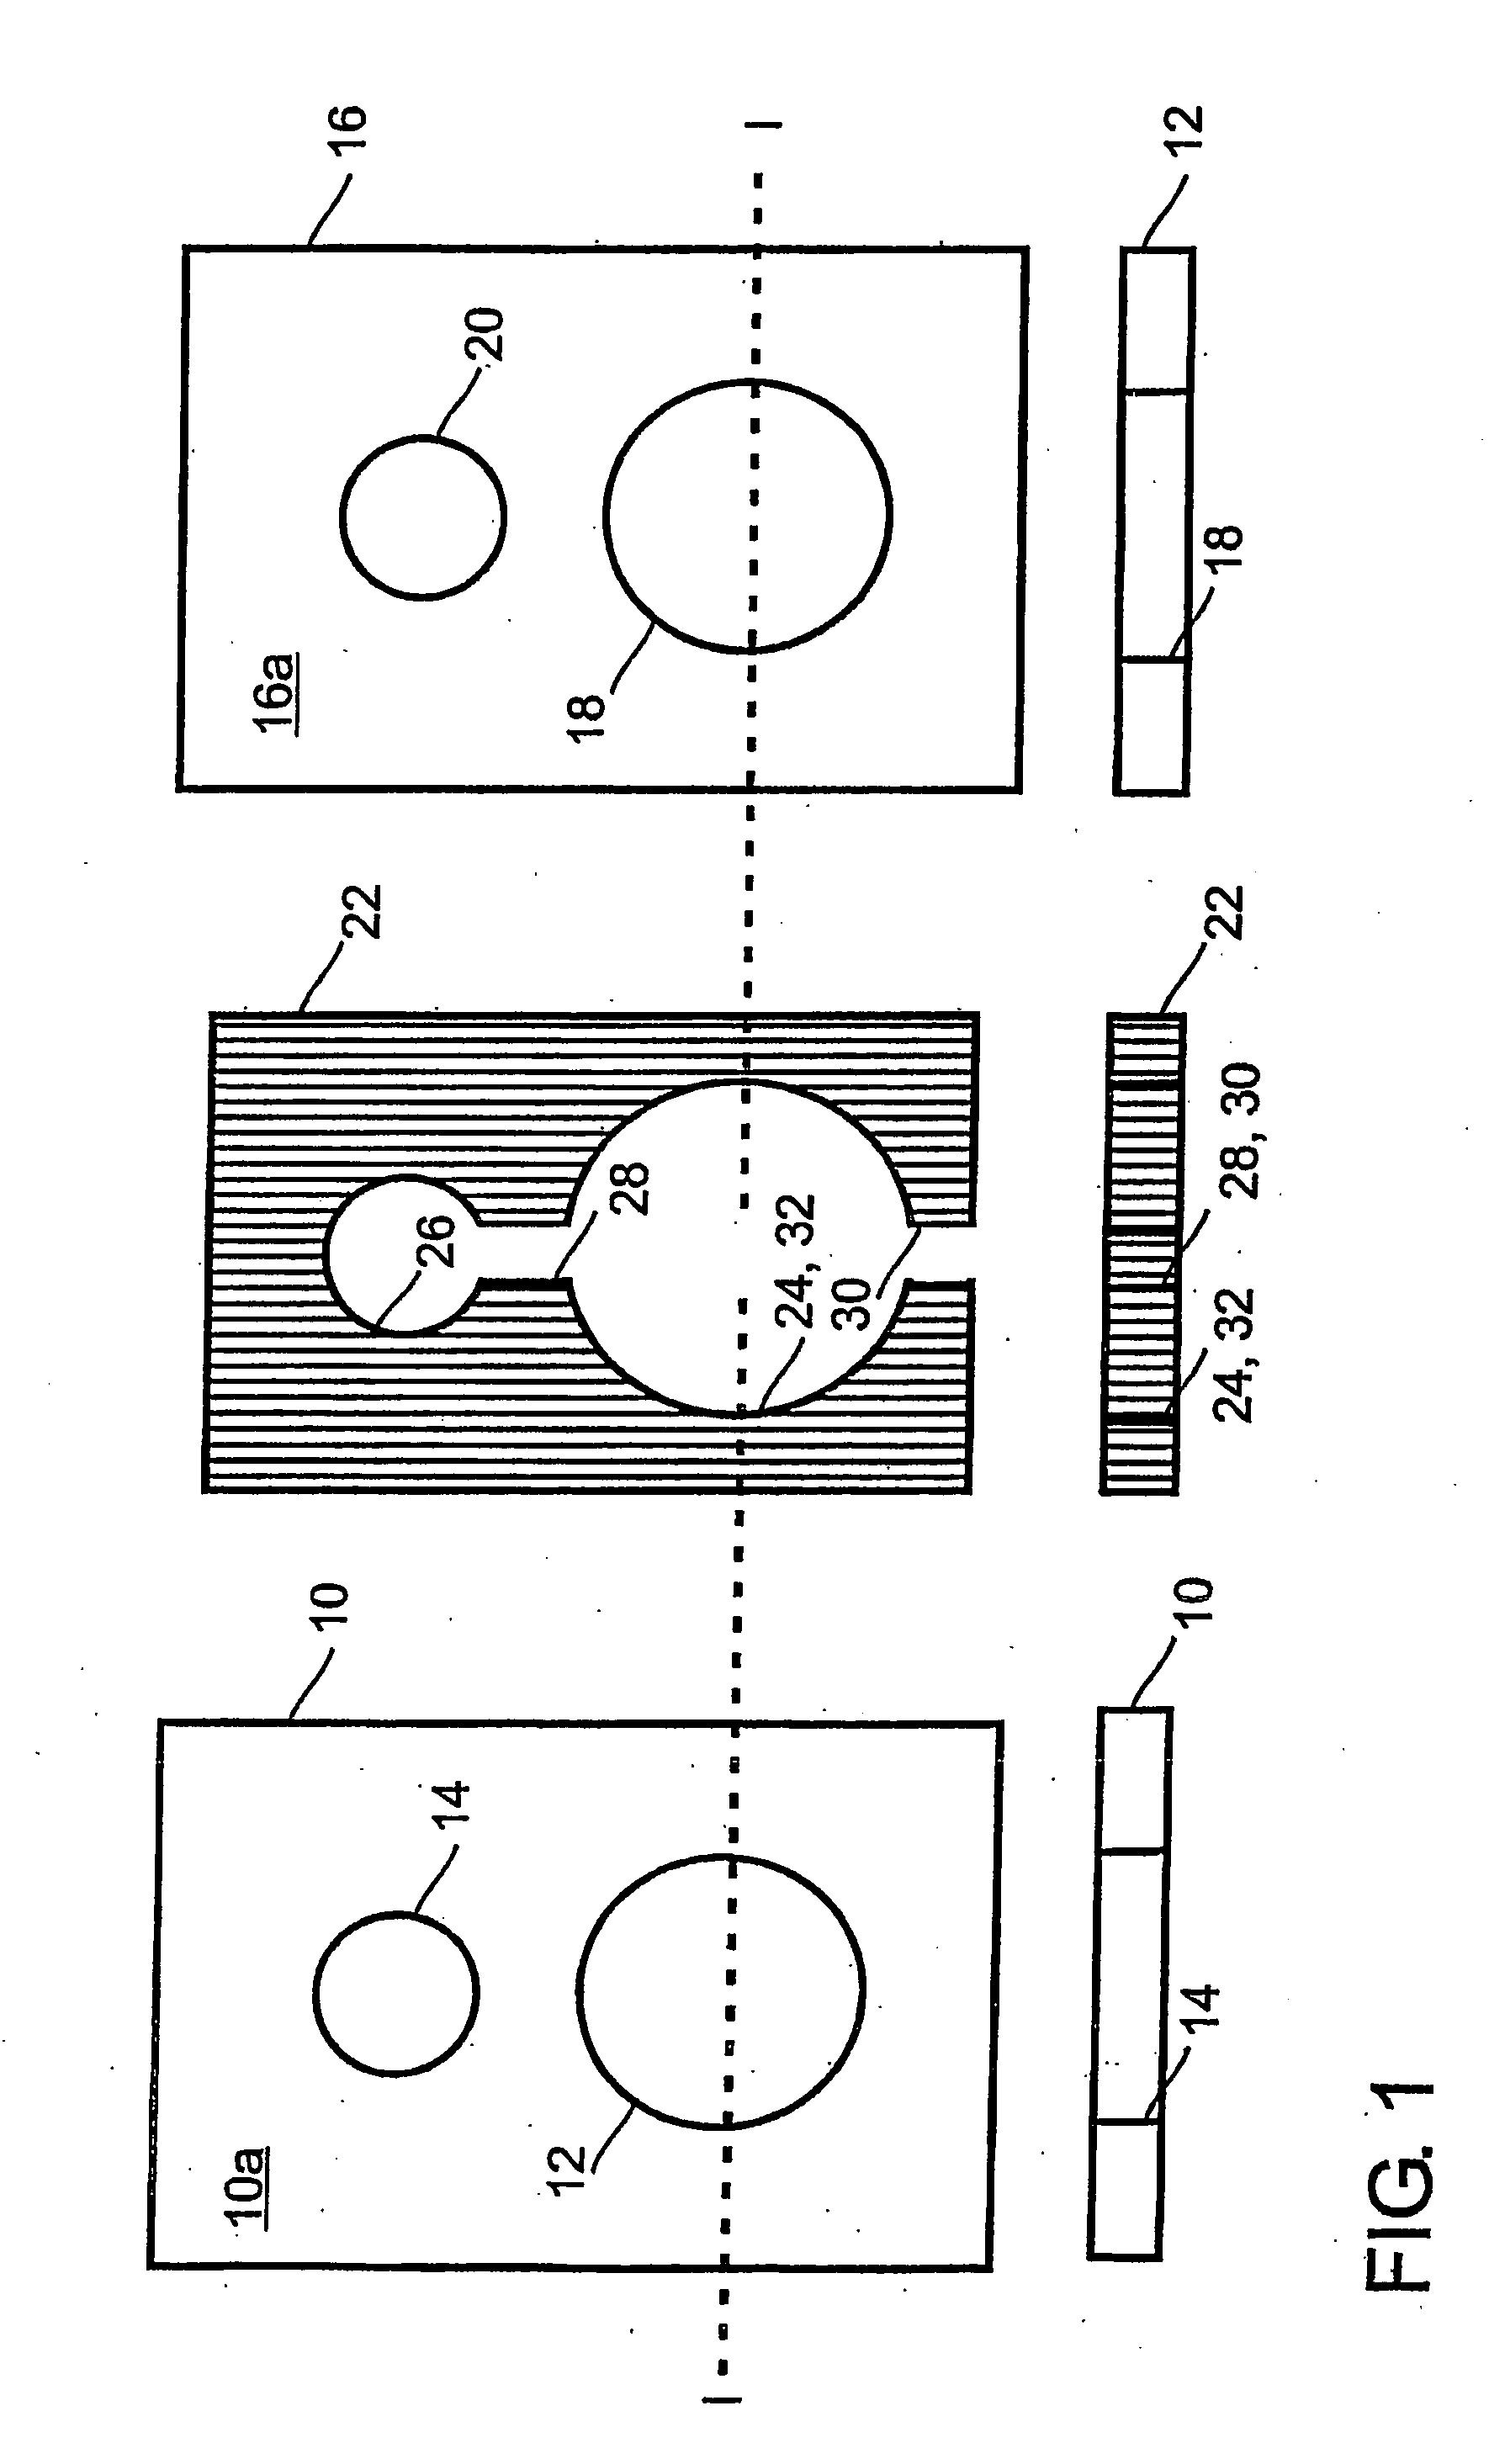 Method for Producing a Fuel Cell Stack